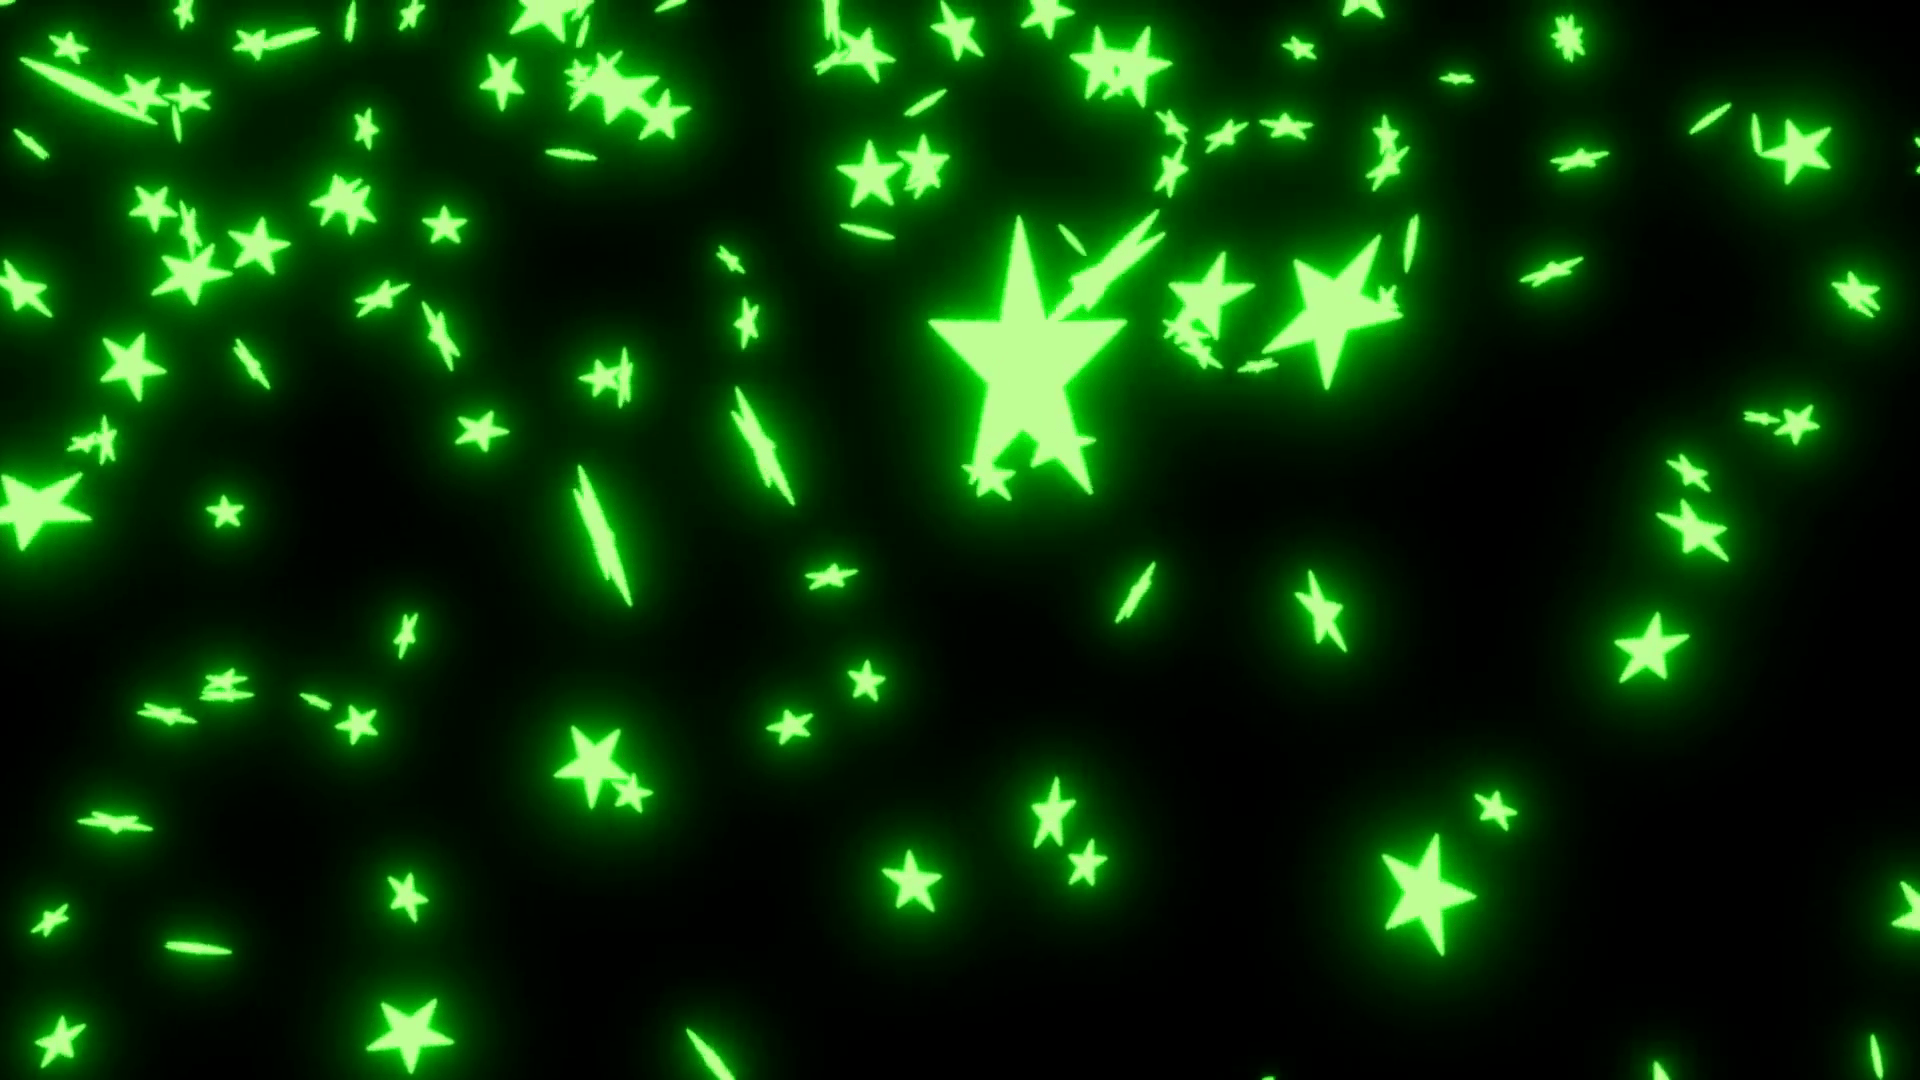 Animated falling neon green stars on black background 2. Motion